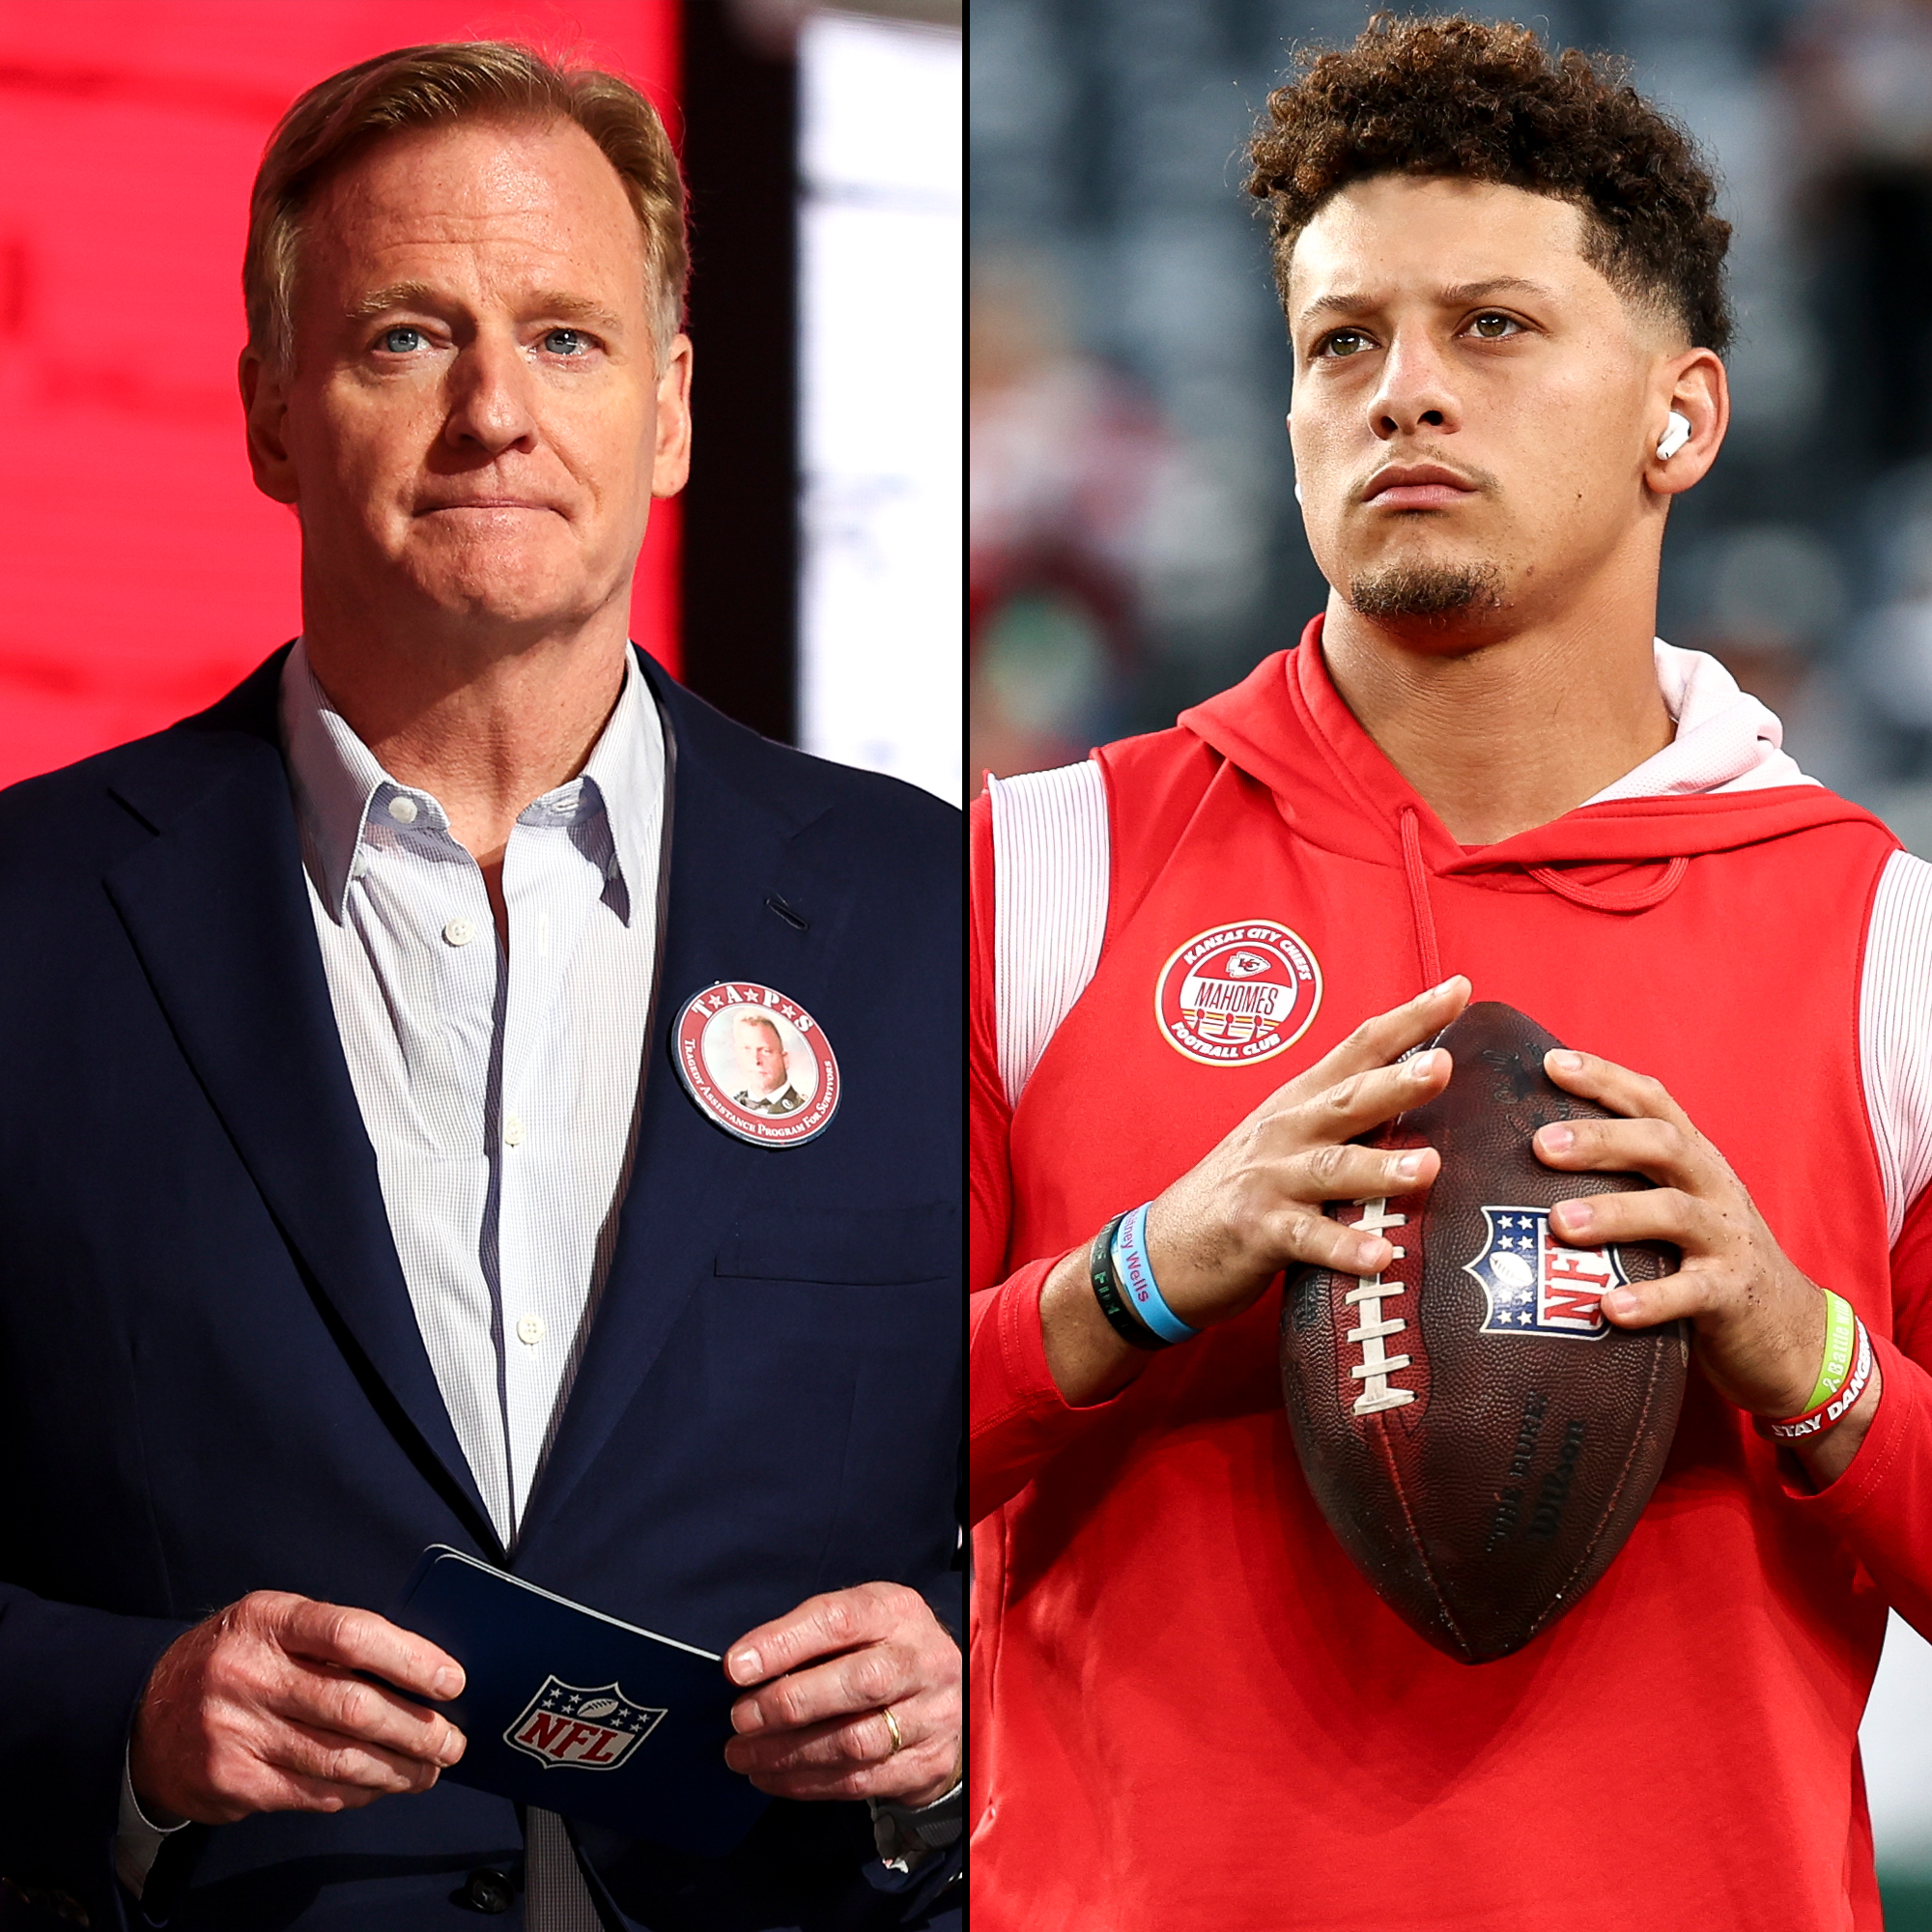 NFL Commissioner Defends 'Correct' Referees After Patrick Mahomes Outburst